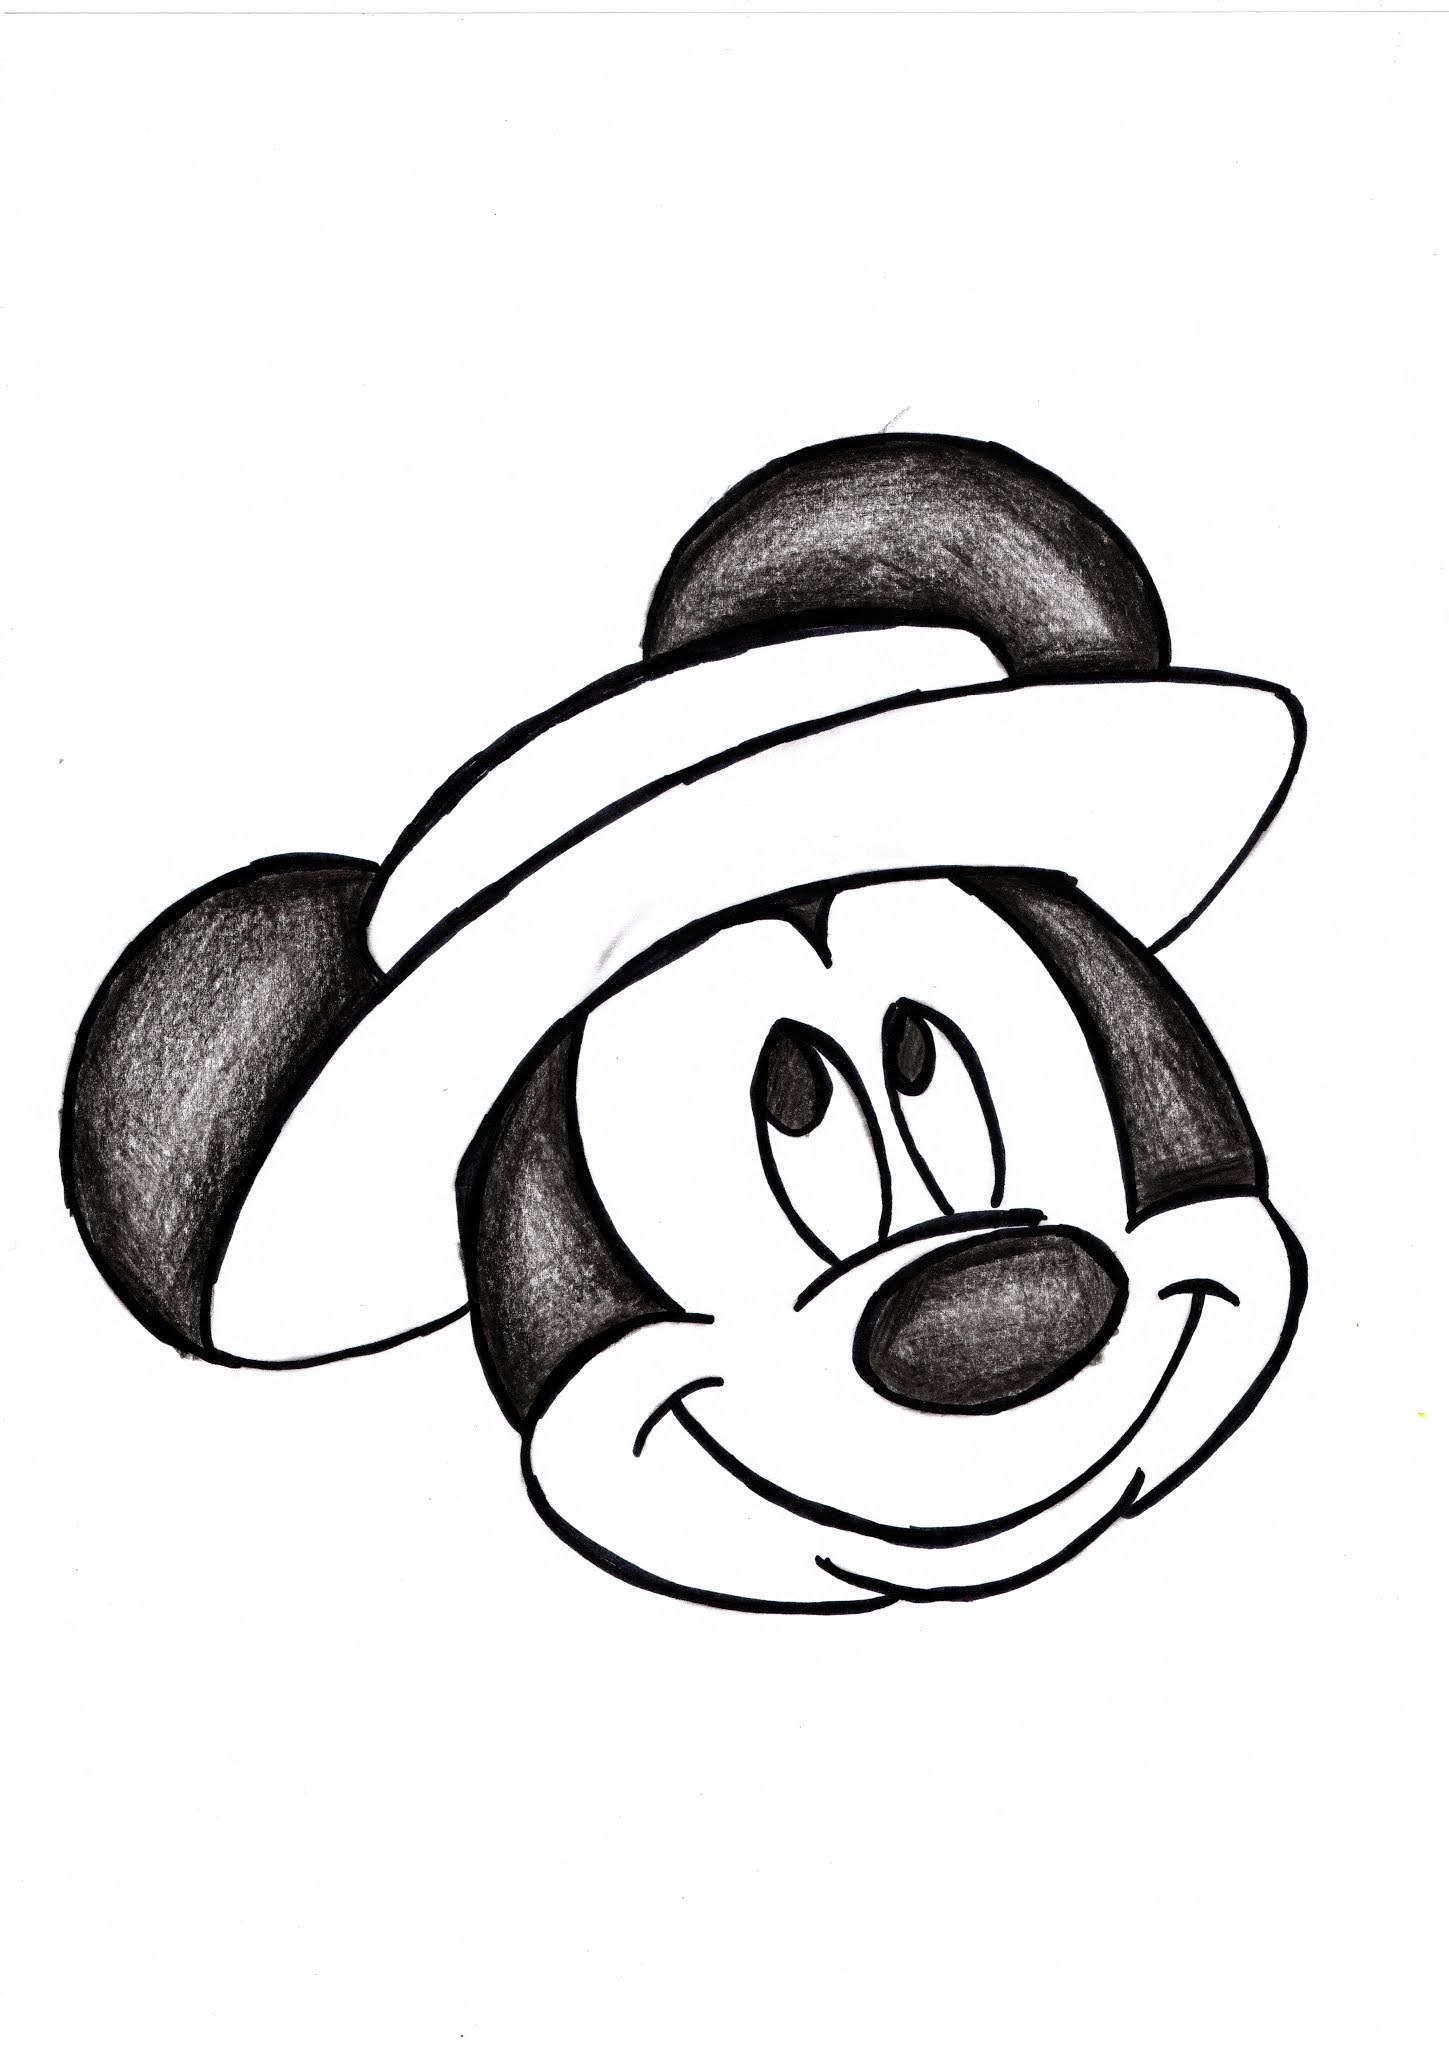 How to draw Mickey Mouse / n4orbgm9p.png / LetsDrawIt